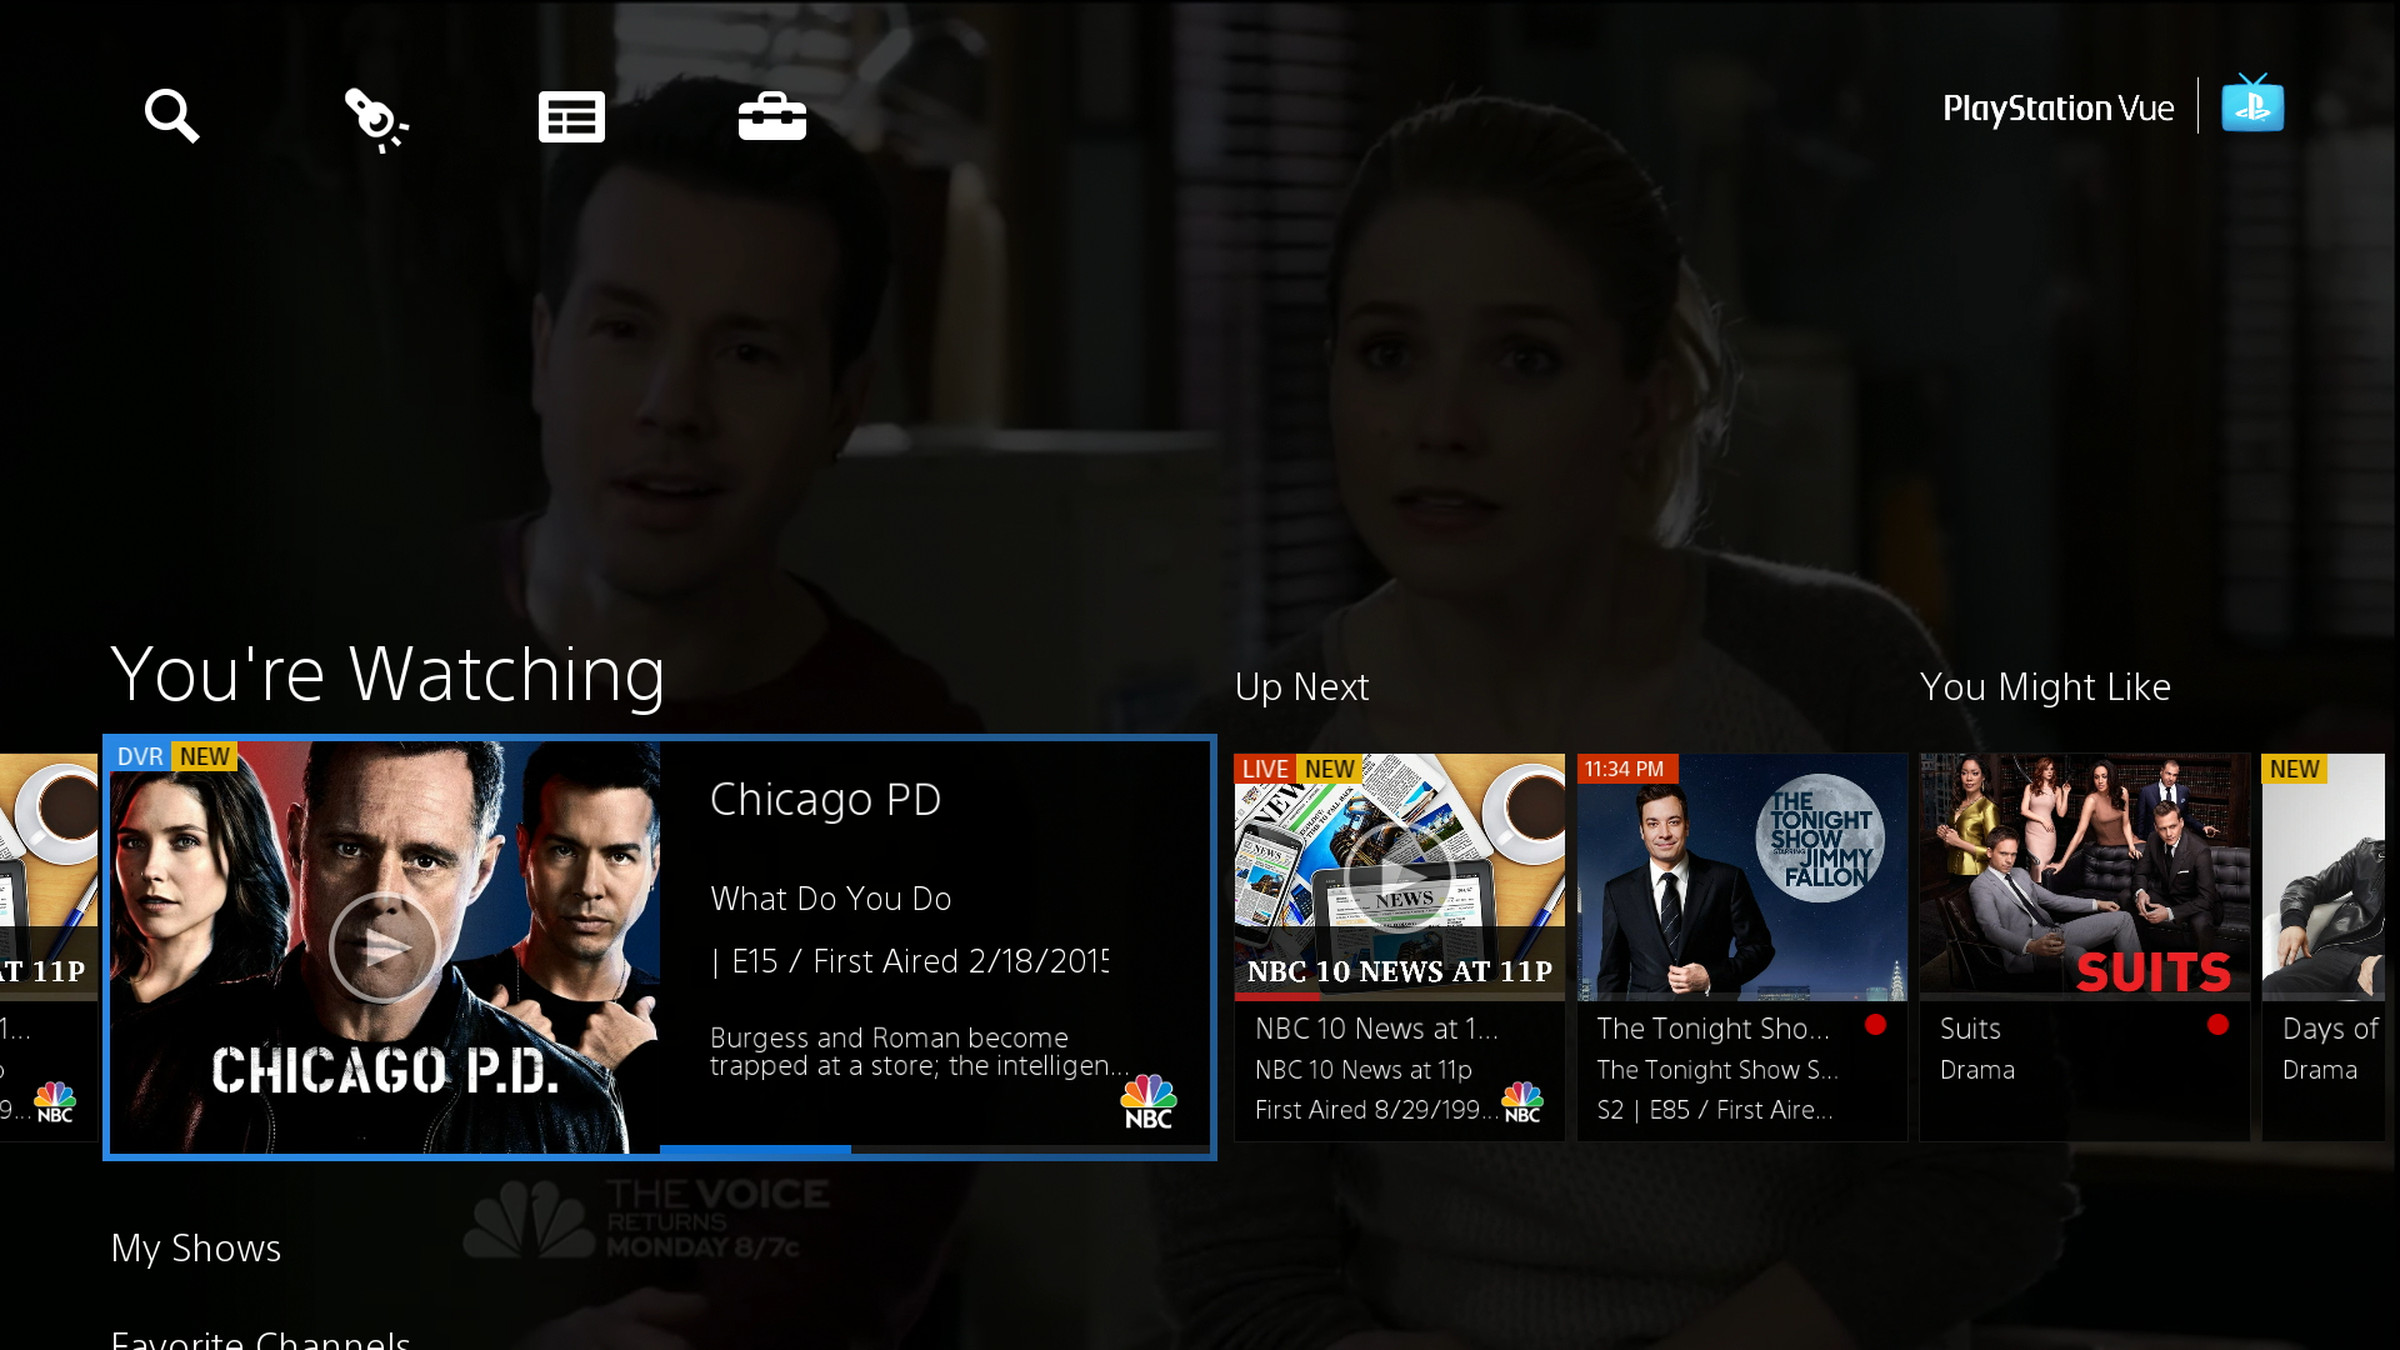 PlayStation Vue interface